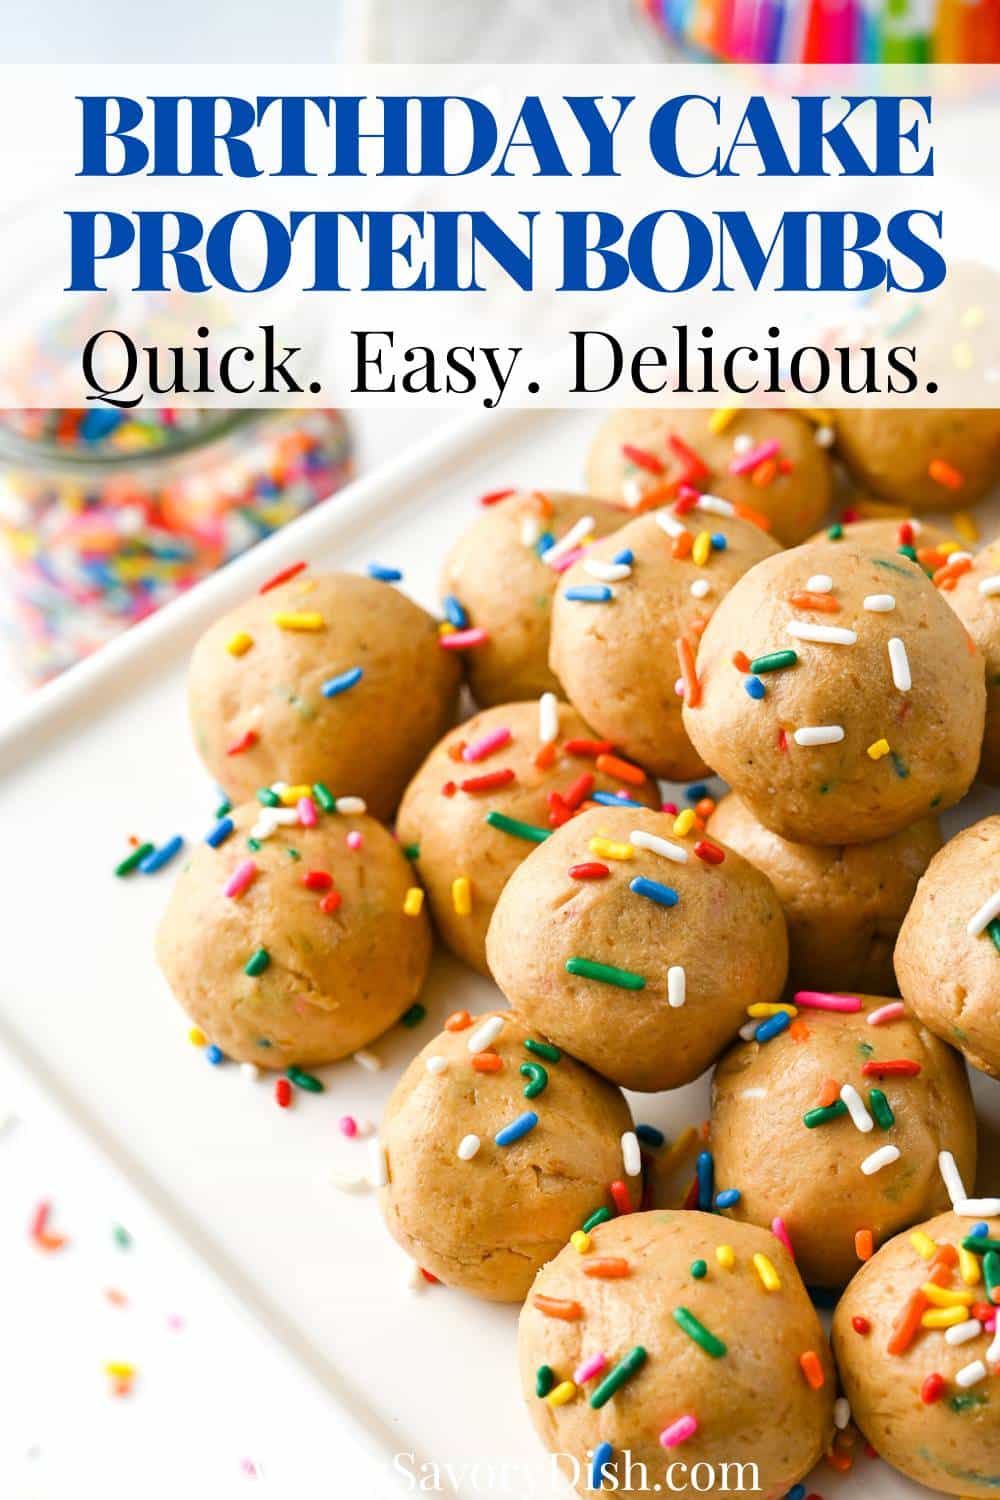 These Birthday Cake Protein Bombs are a nutrient-packed powerhouse disguised as a sweet treat! Quick, easy, and delicious! via @Ameessavorydish